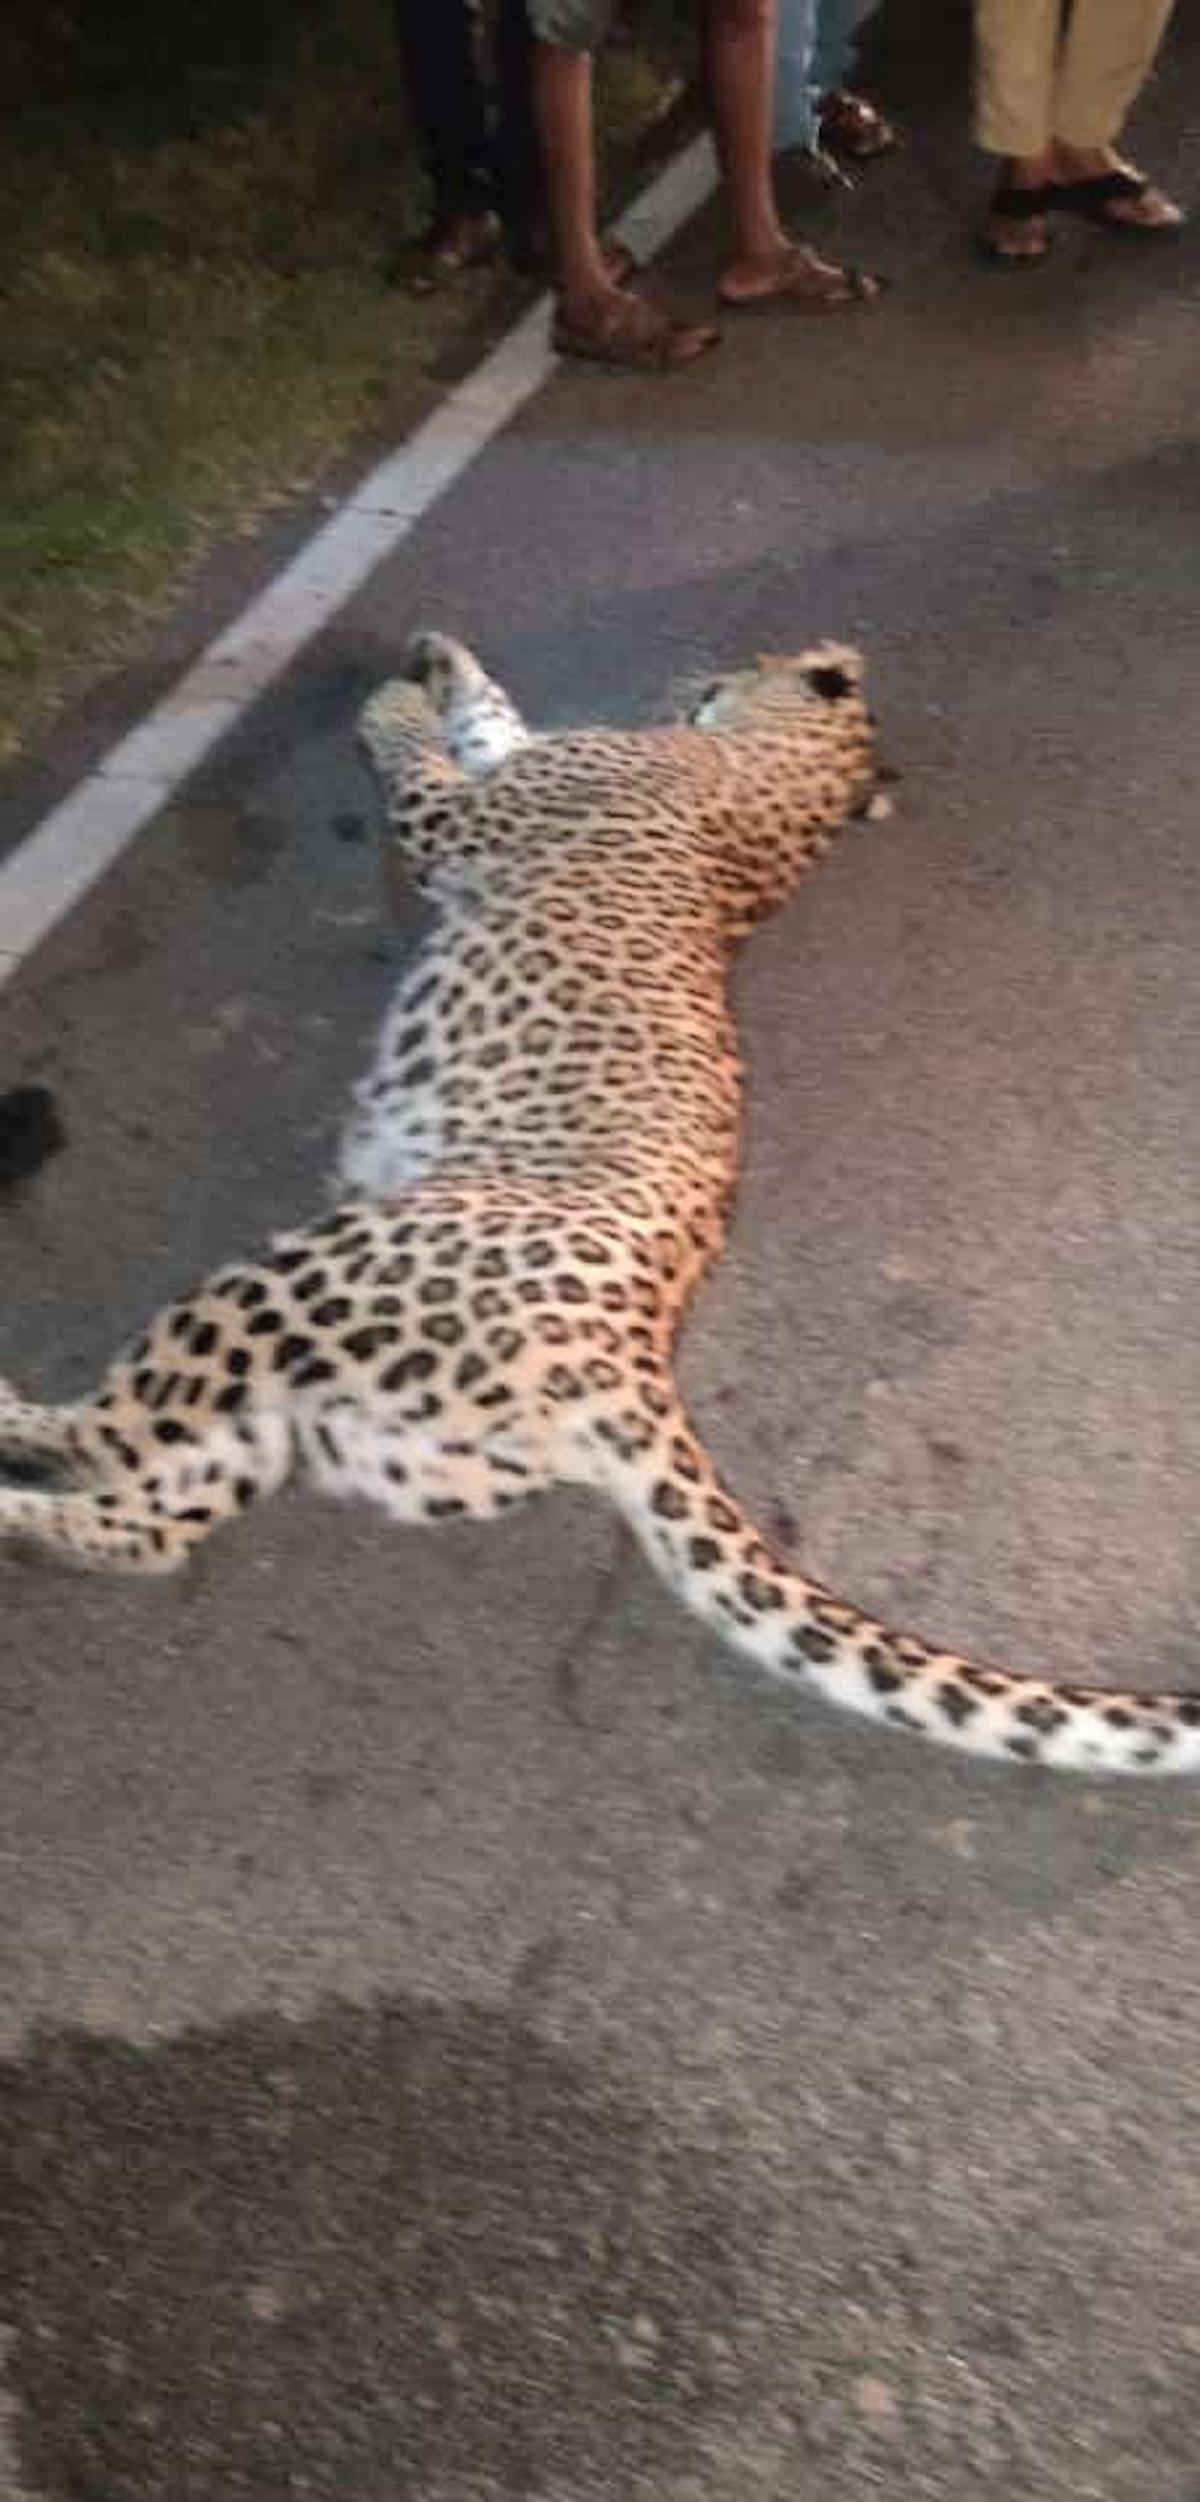 Leopard dies after being hit by a vehicle in Anantapur district of Andhra Pradesh